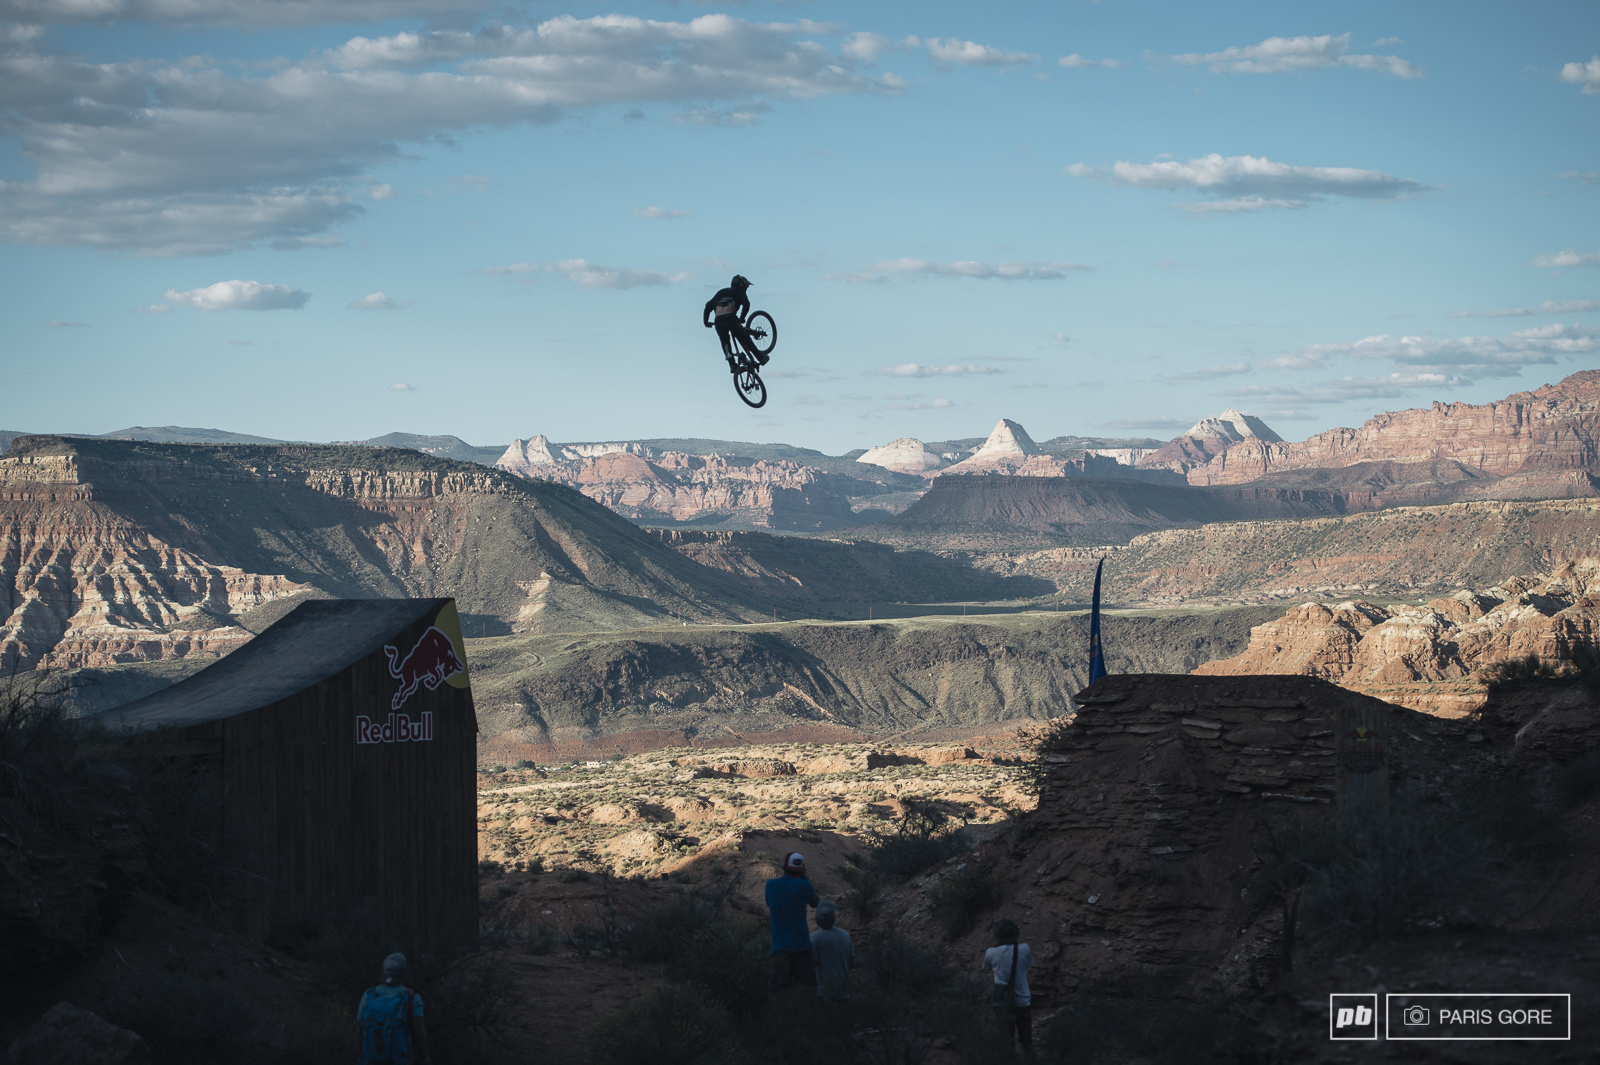 Tom Van Steenbergen was the first to guniea pig the canyon gap and hit it nearly perfect.